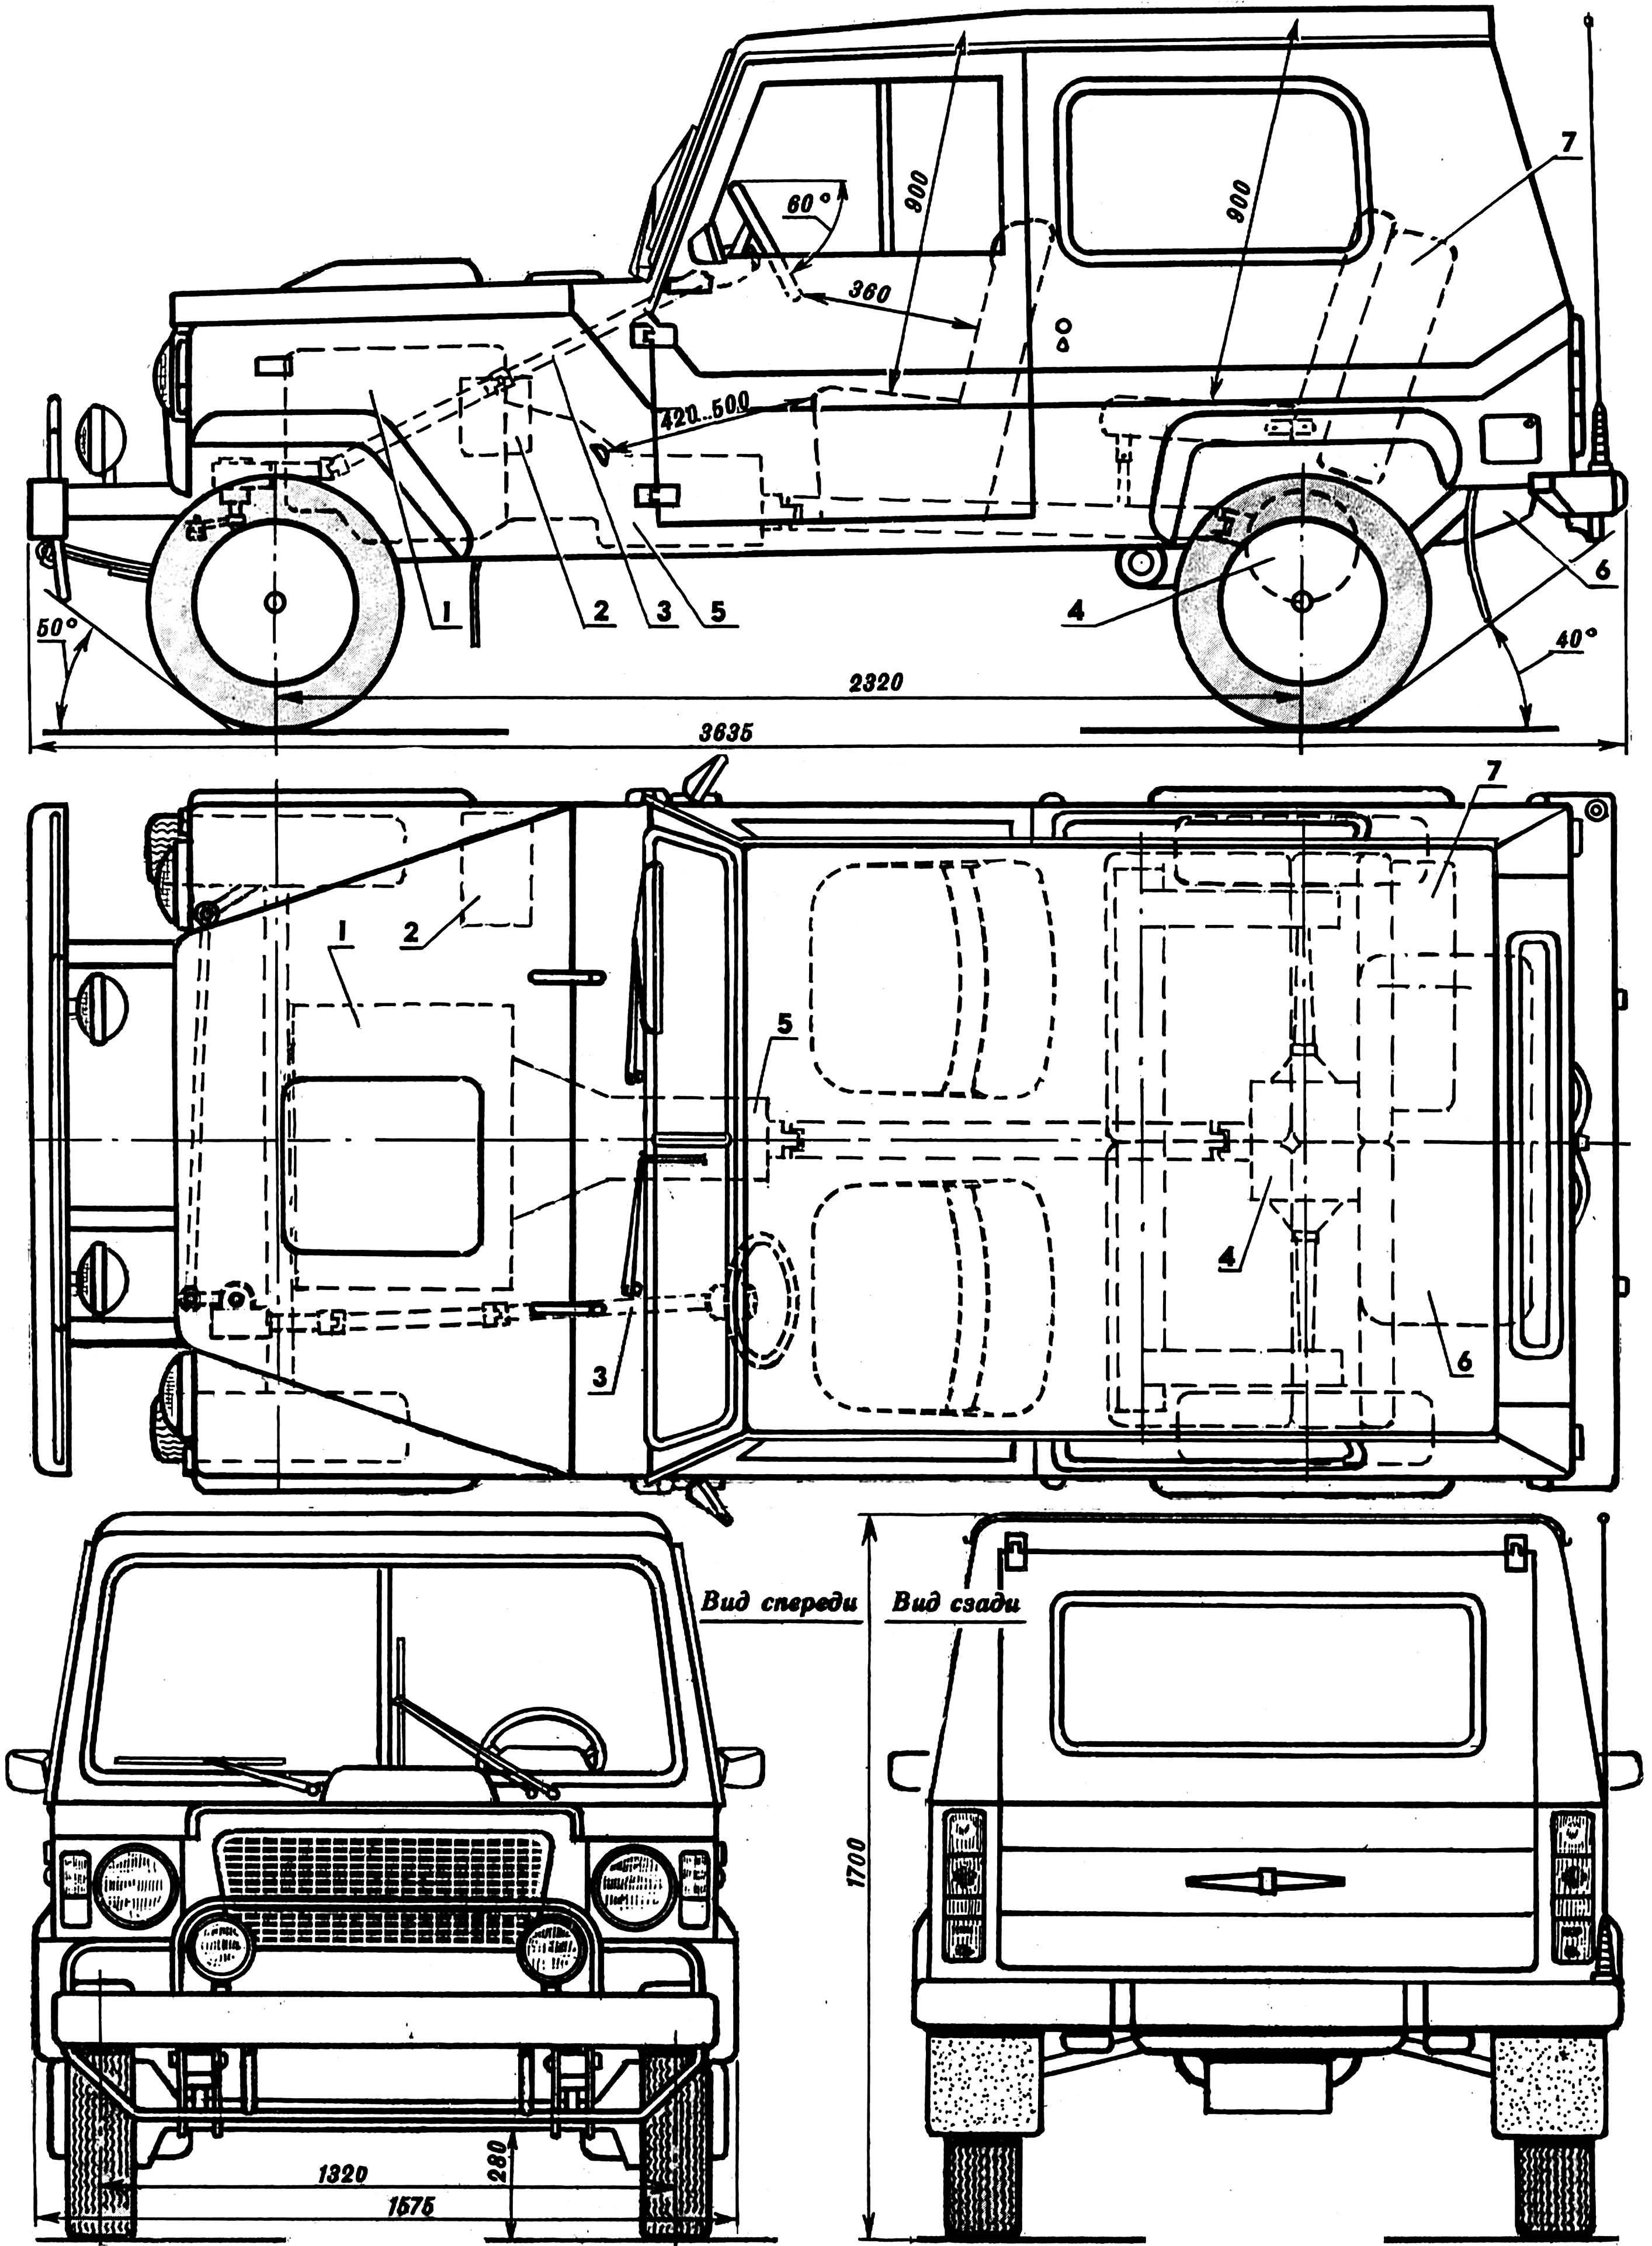 The layout of the car.